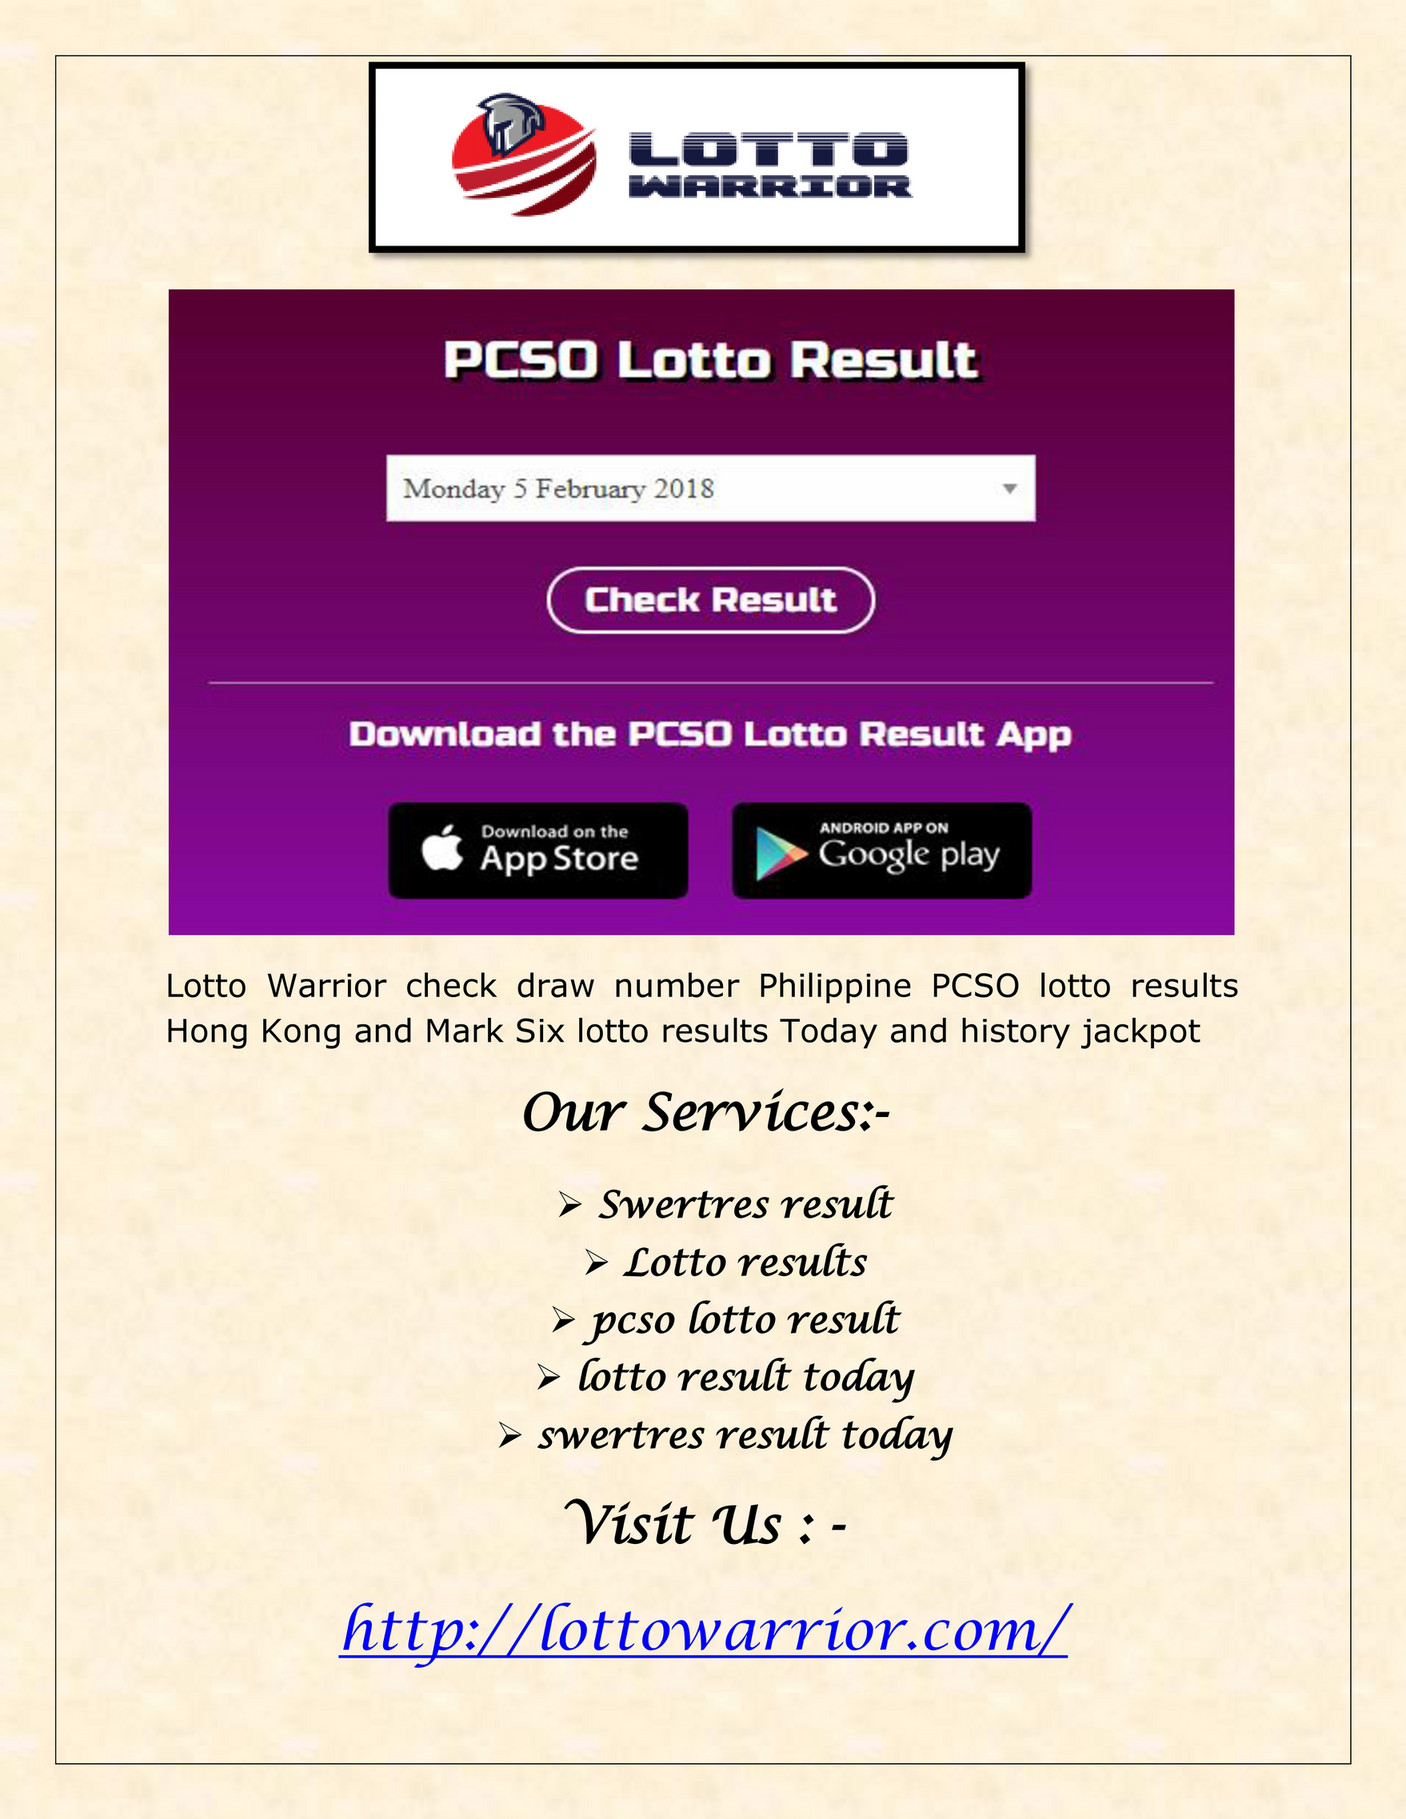 check lotto results today